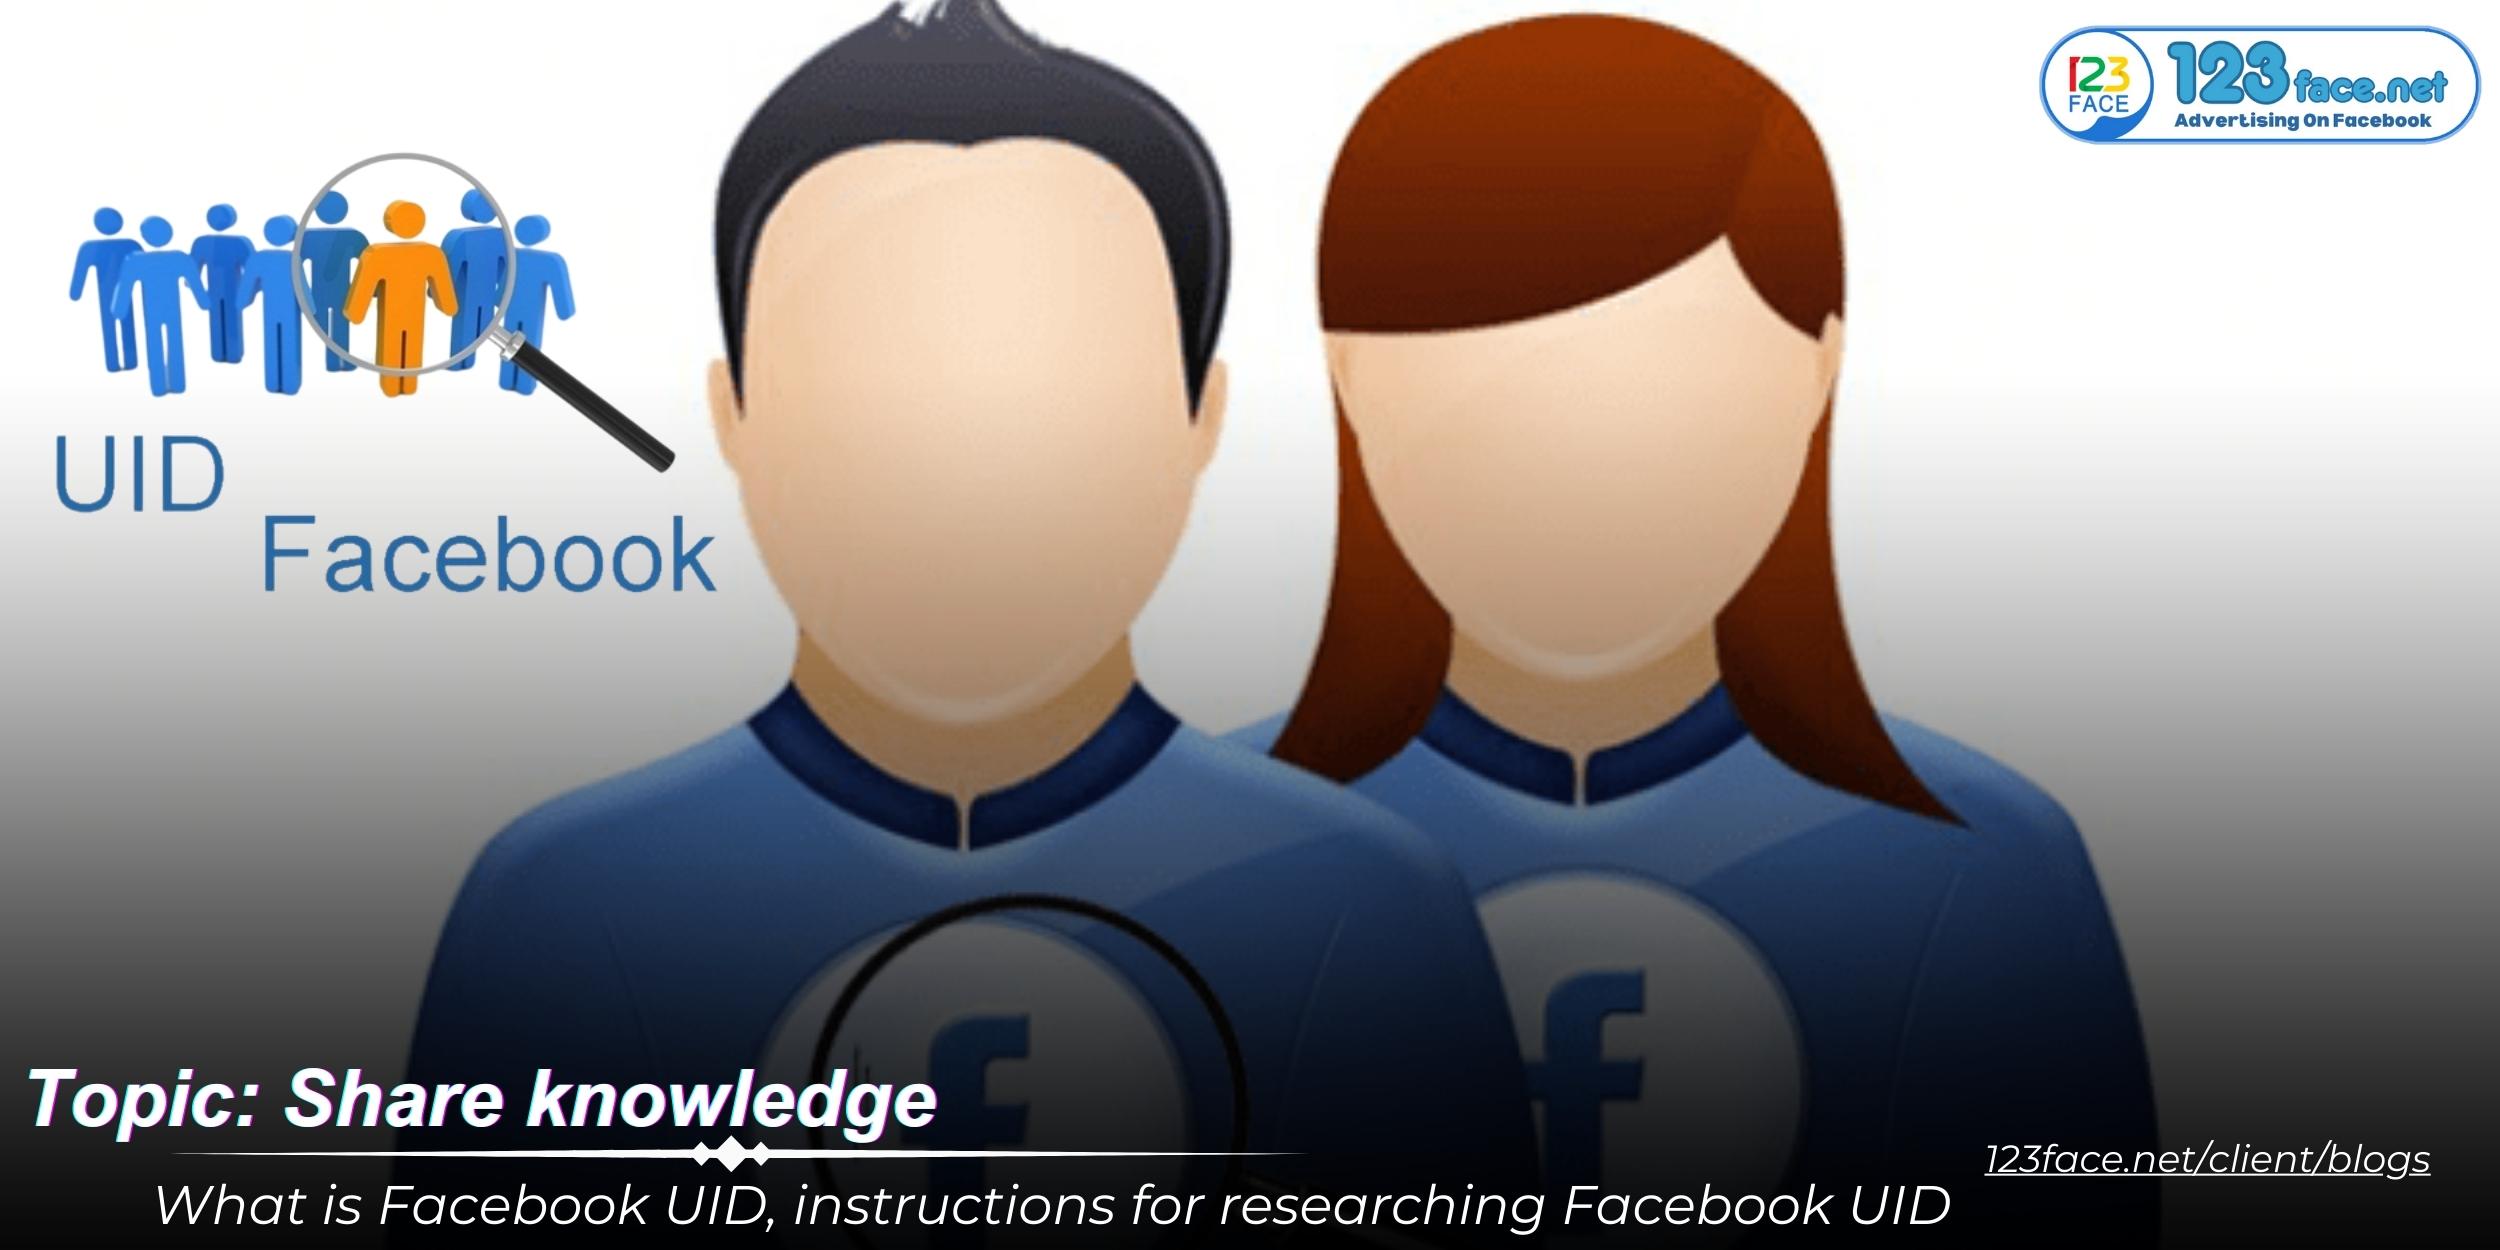 What is Facebook UID, instructions for researching Facebook UID